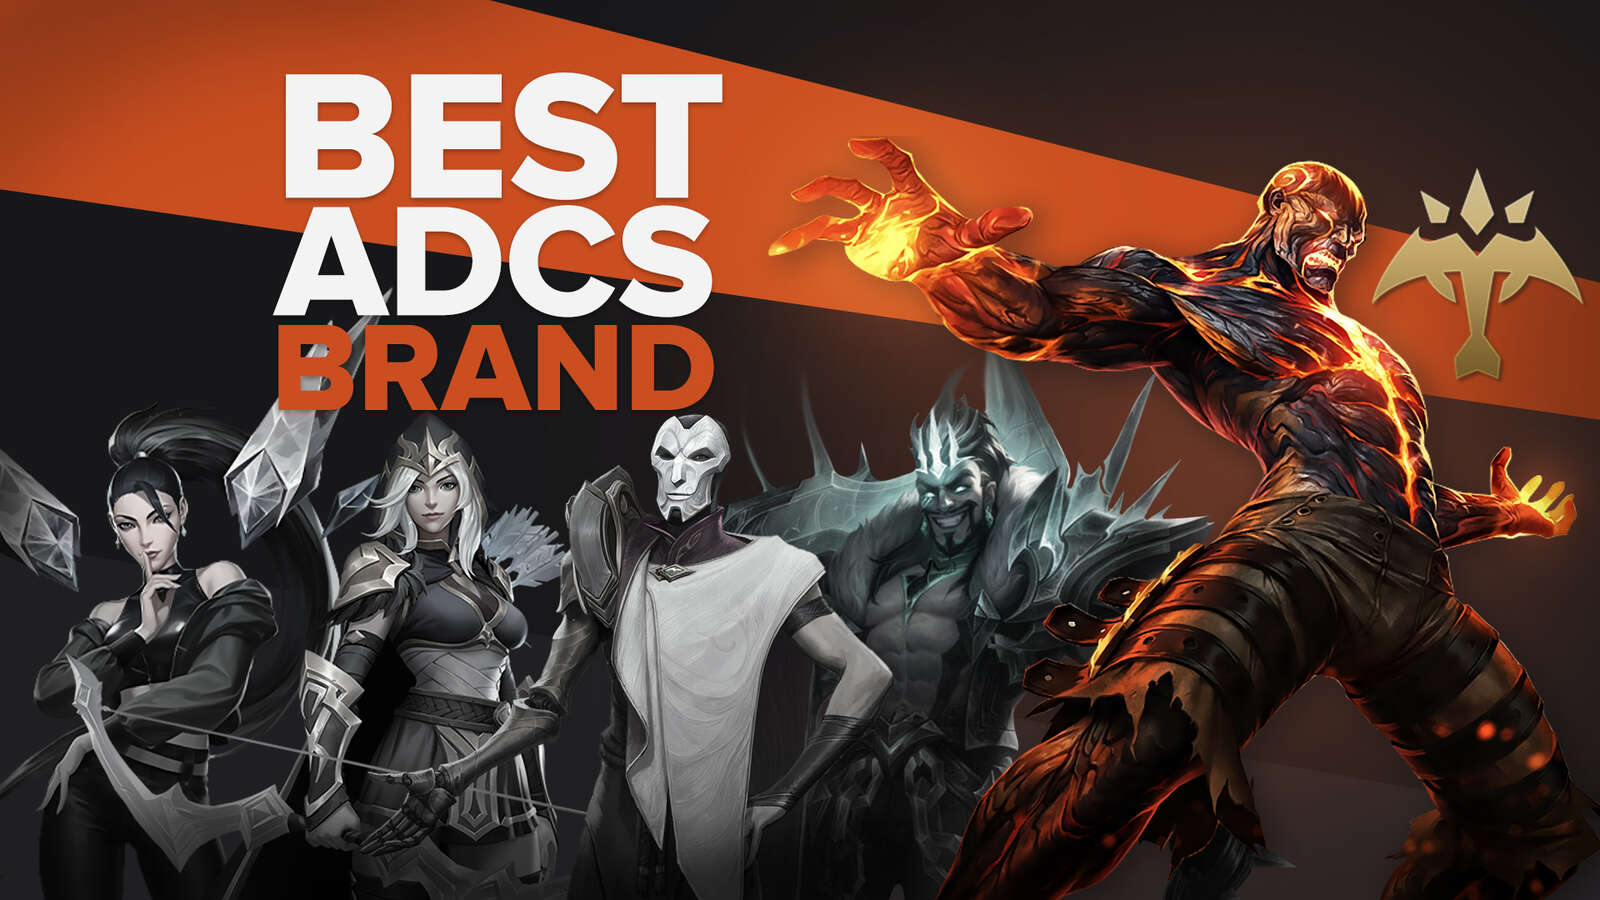 The best ADC champions for Brand